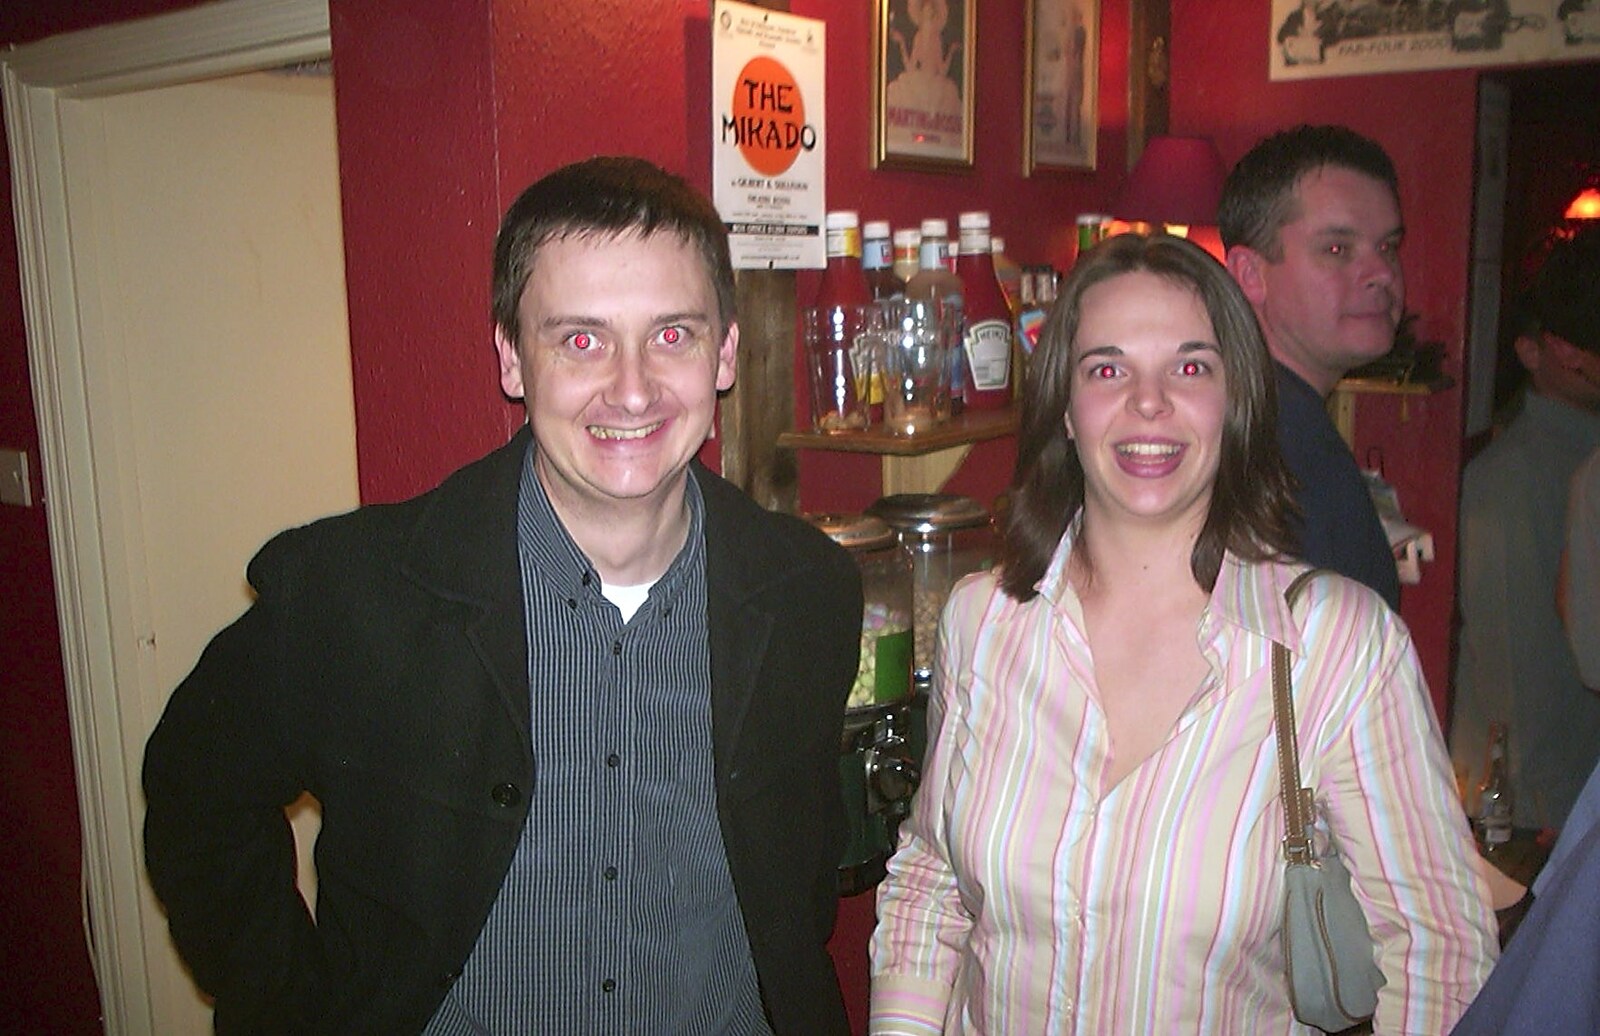 A March Miscellany: The BBs, Pulham Pubs and Broken Cars - Norfolk and Cambridgeshire, 31st March 2004: Andrew and Jen